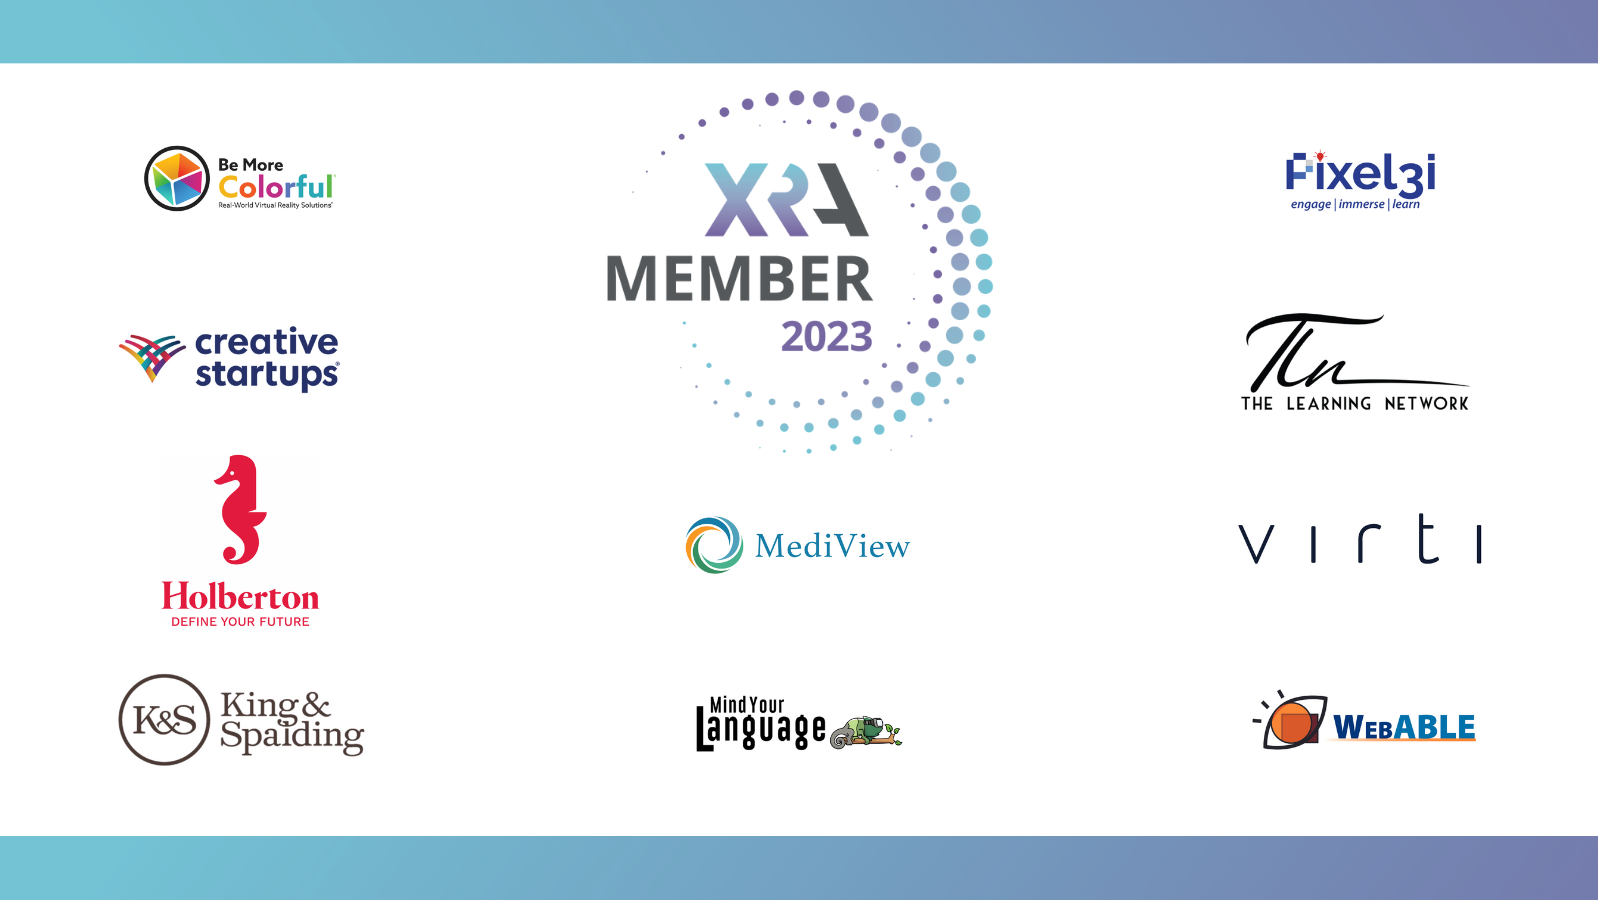 THE XR ASSOCIATION WELCOMES 10 NEW MEMBER COMPANIES INCLUDING MEDIVIEW XR, THE LEARNING NETWORK AND KING AND SPALDING